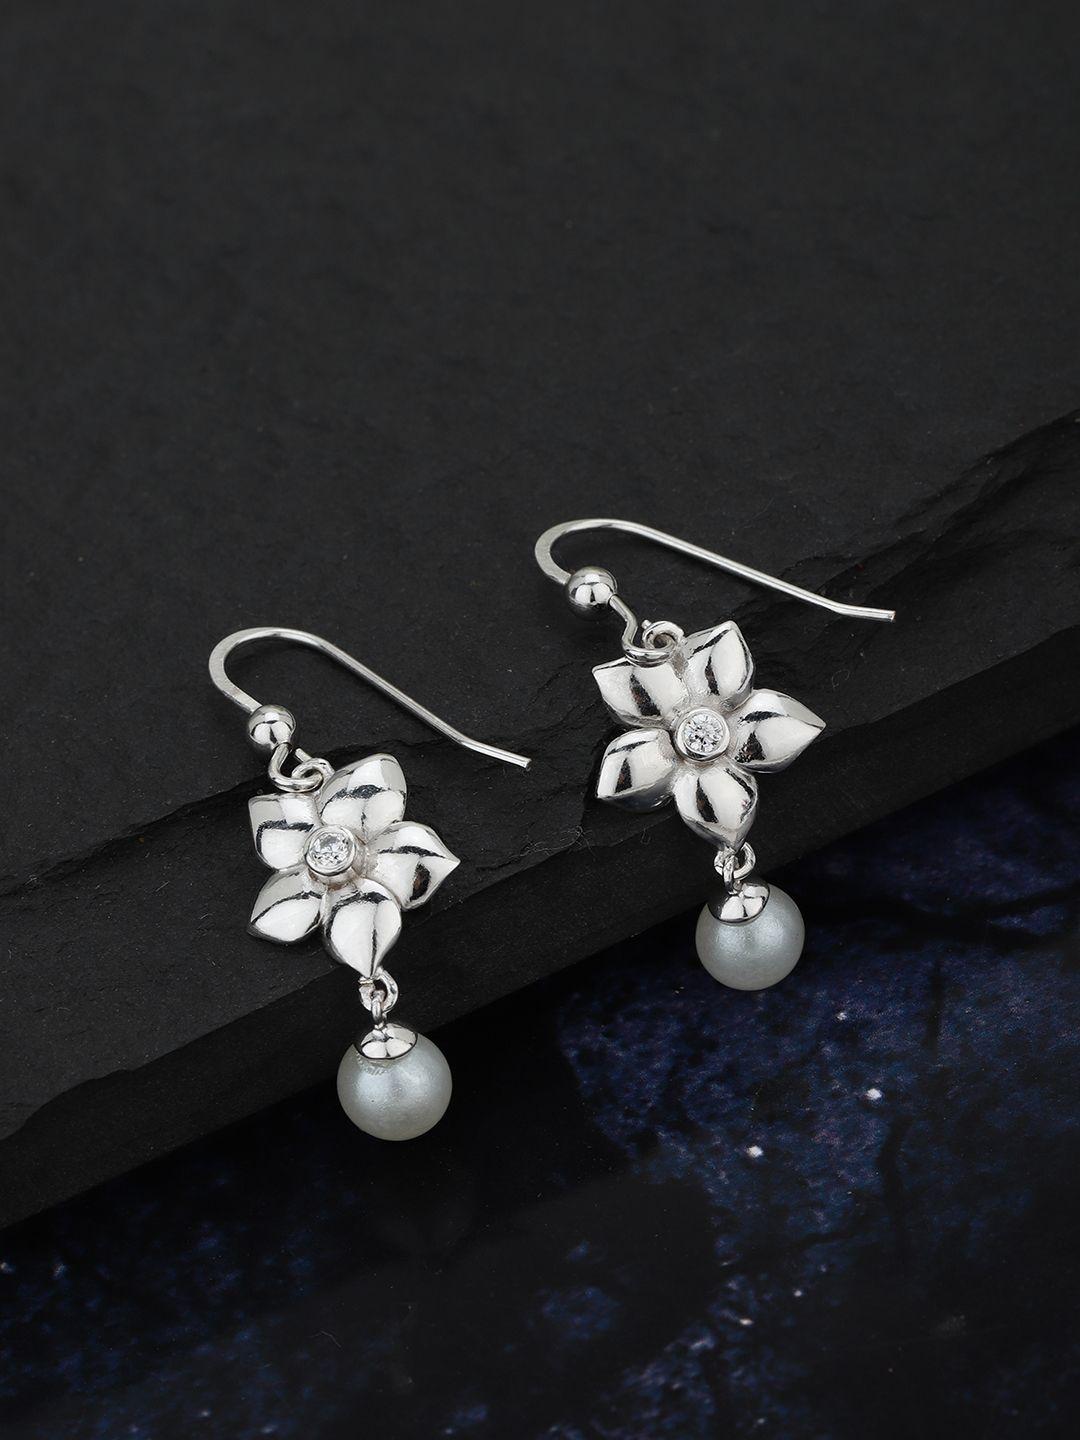 carlton london silver-toned & white rhodium-plated beaded floral drop earrings